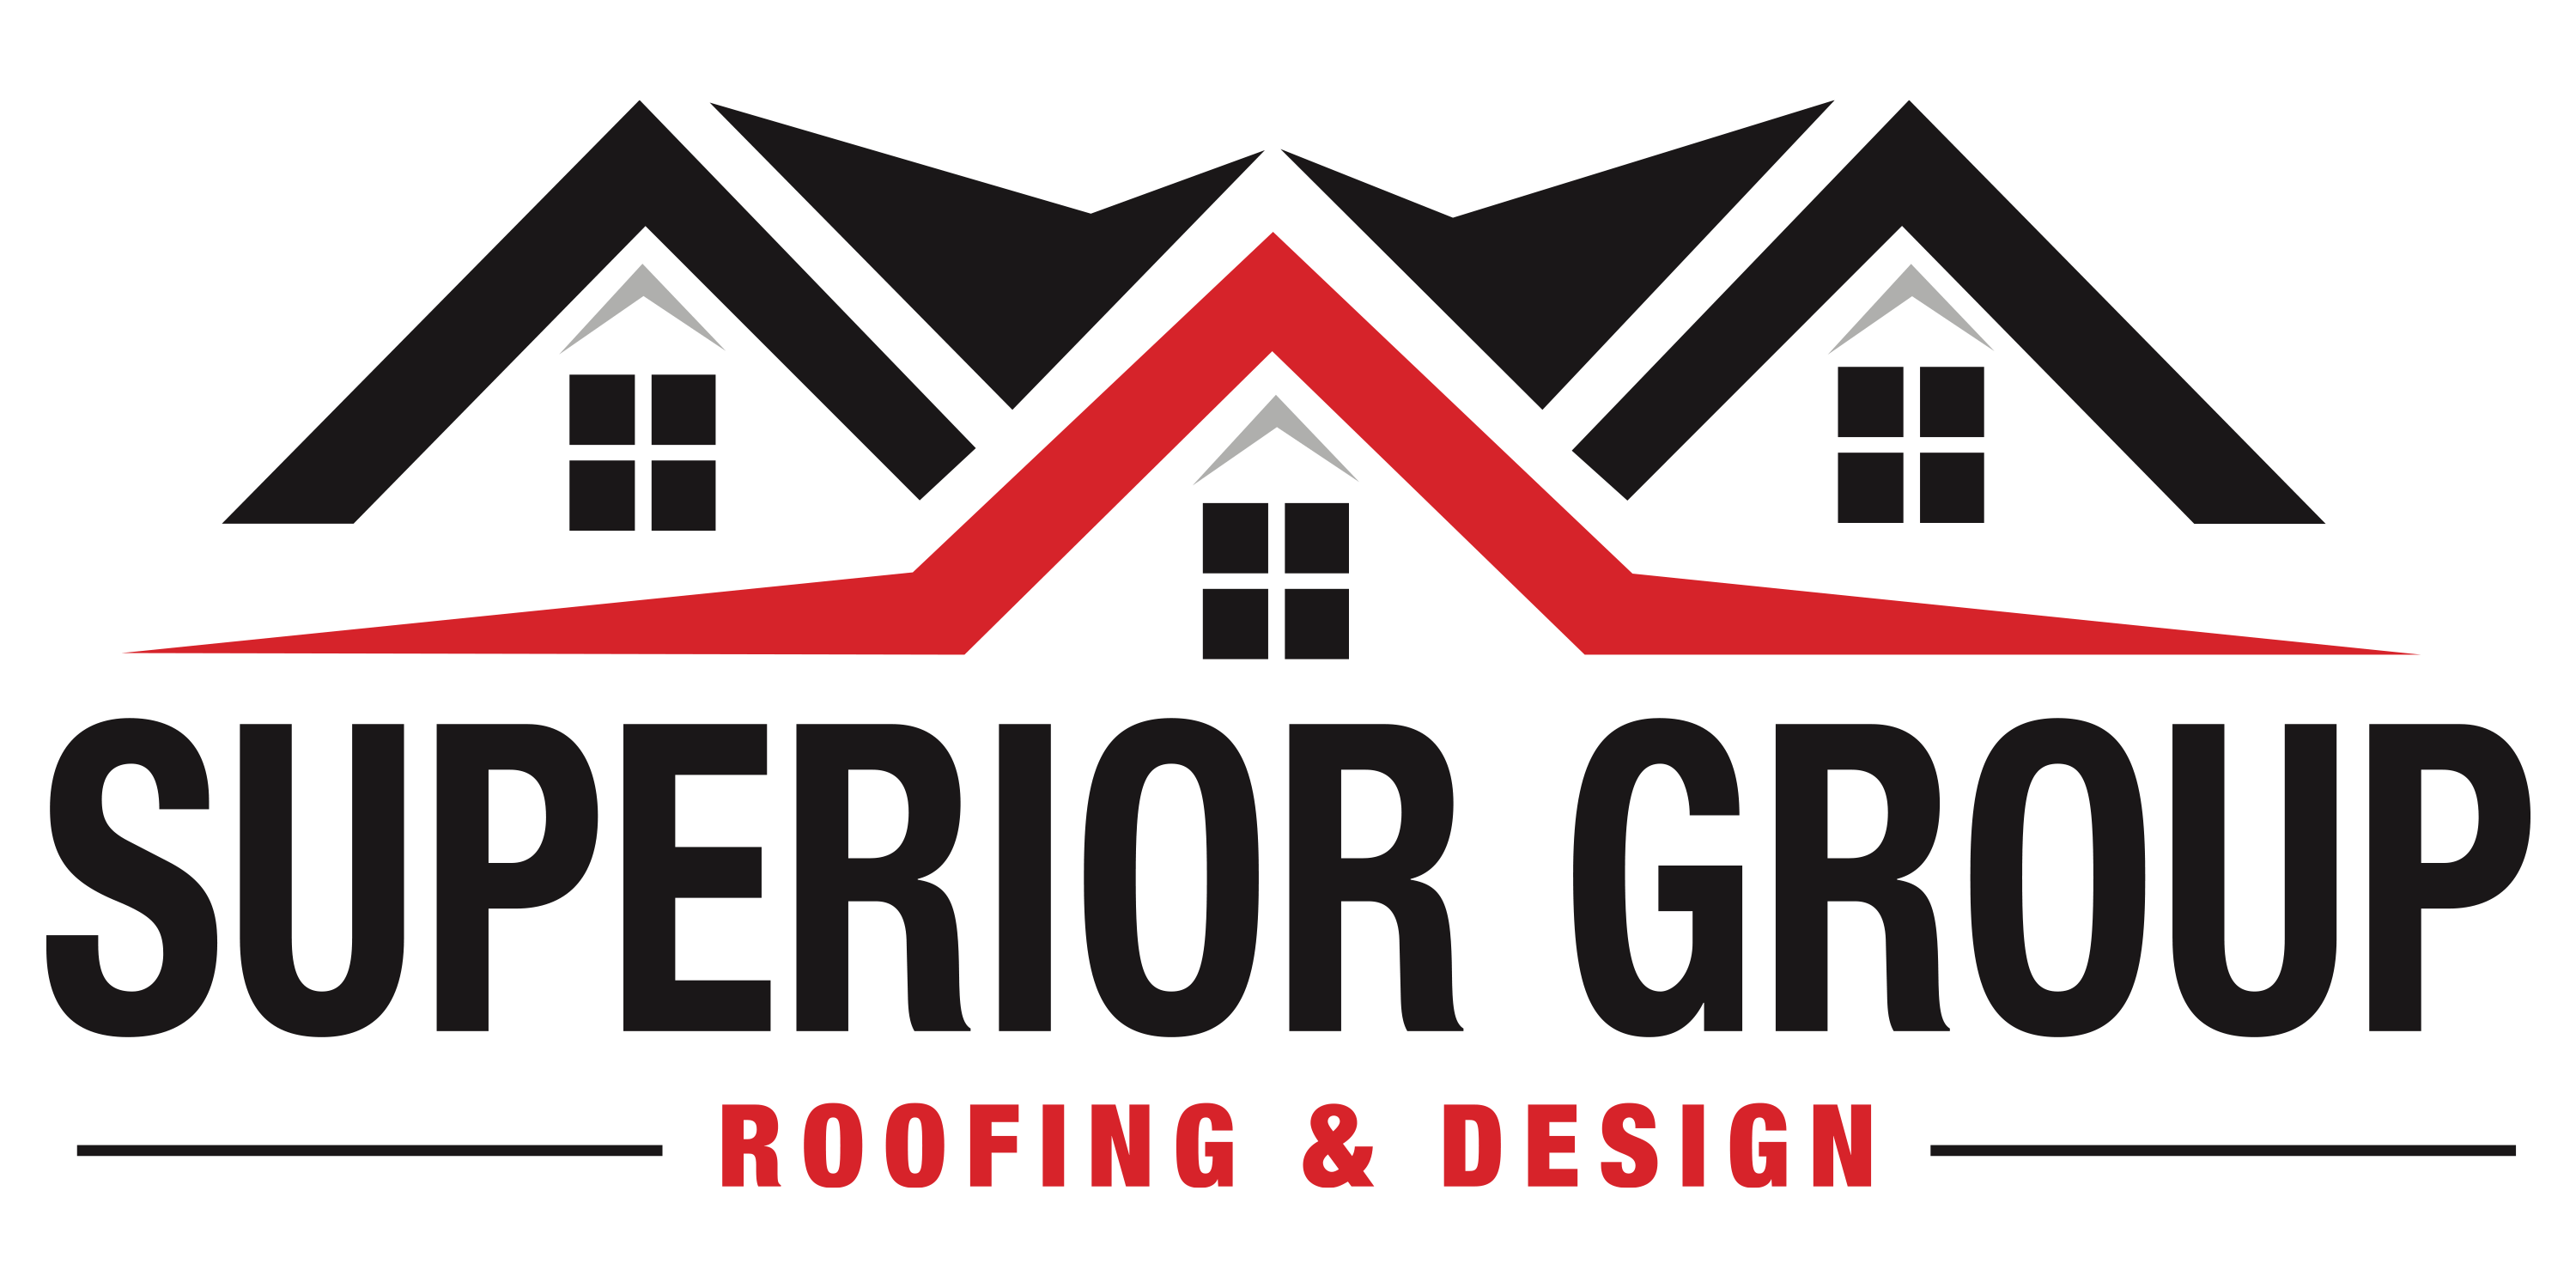 Superior Group Roofing & Design - Louisiana Local Roofers